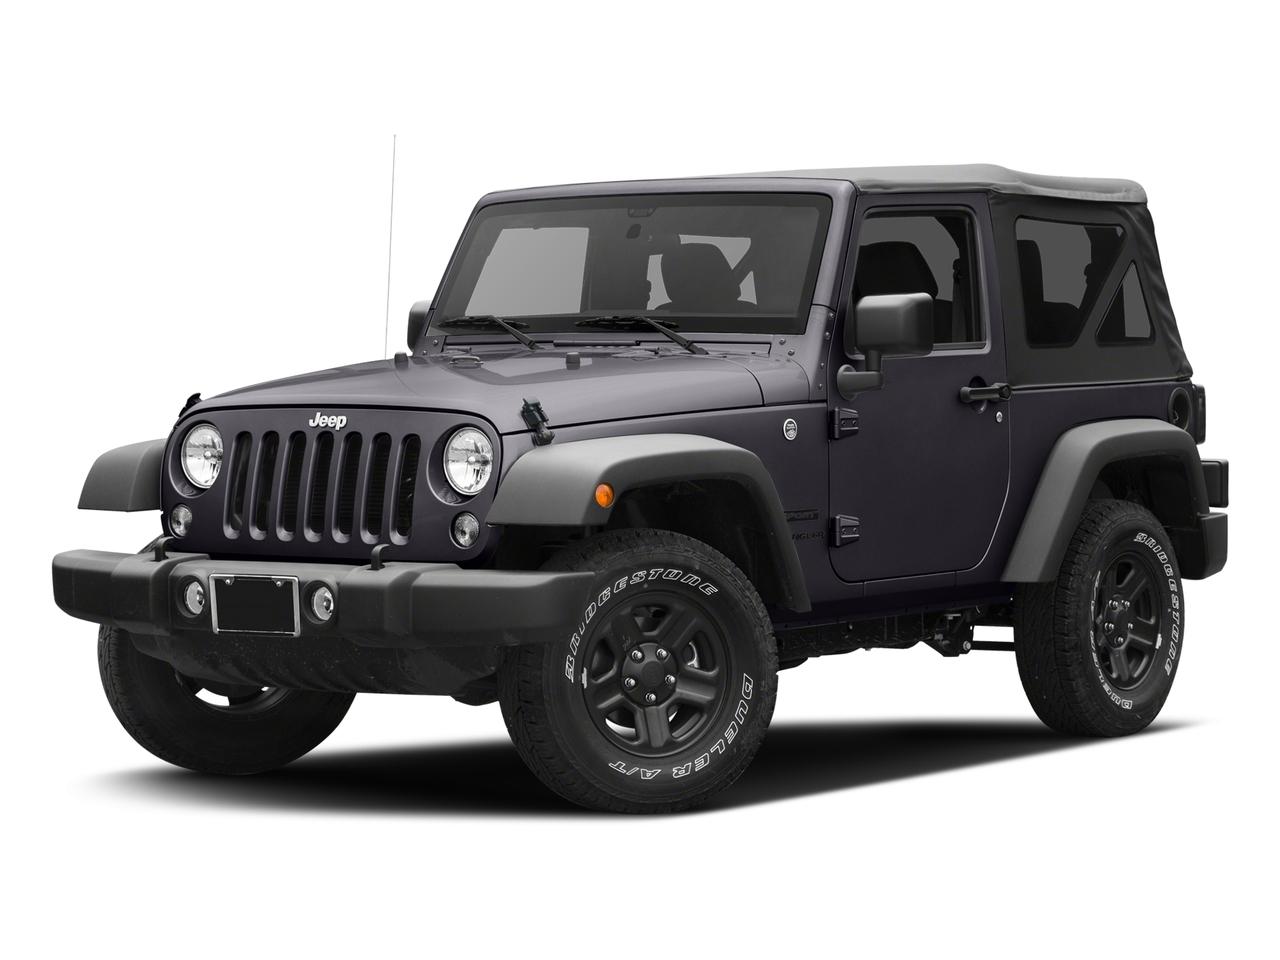 MOORESVILLE Gray 2016 Jeep Wrangler: Used Suv for Sale - 1C4AJWAG1GL184826